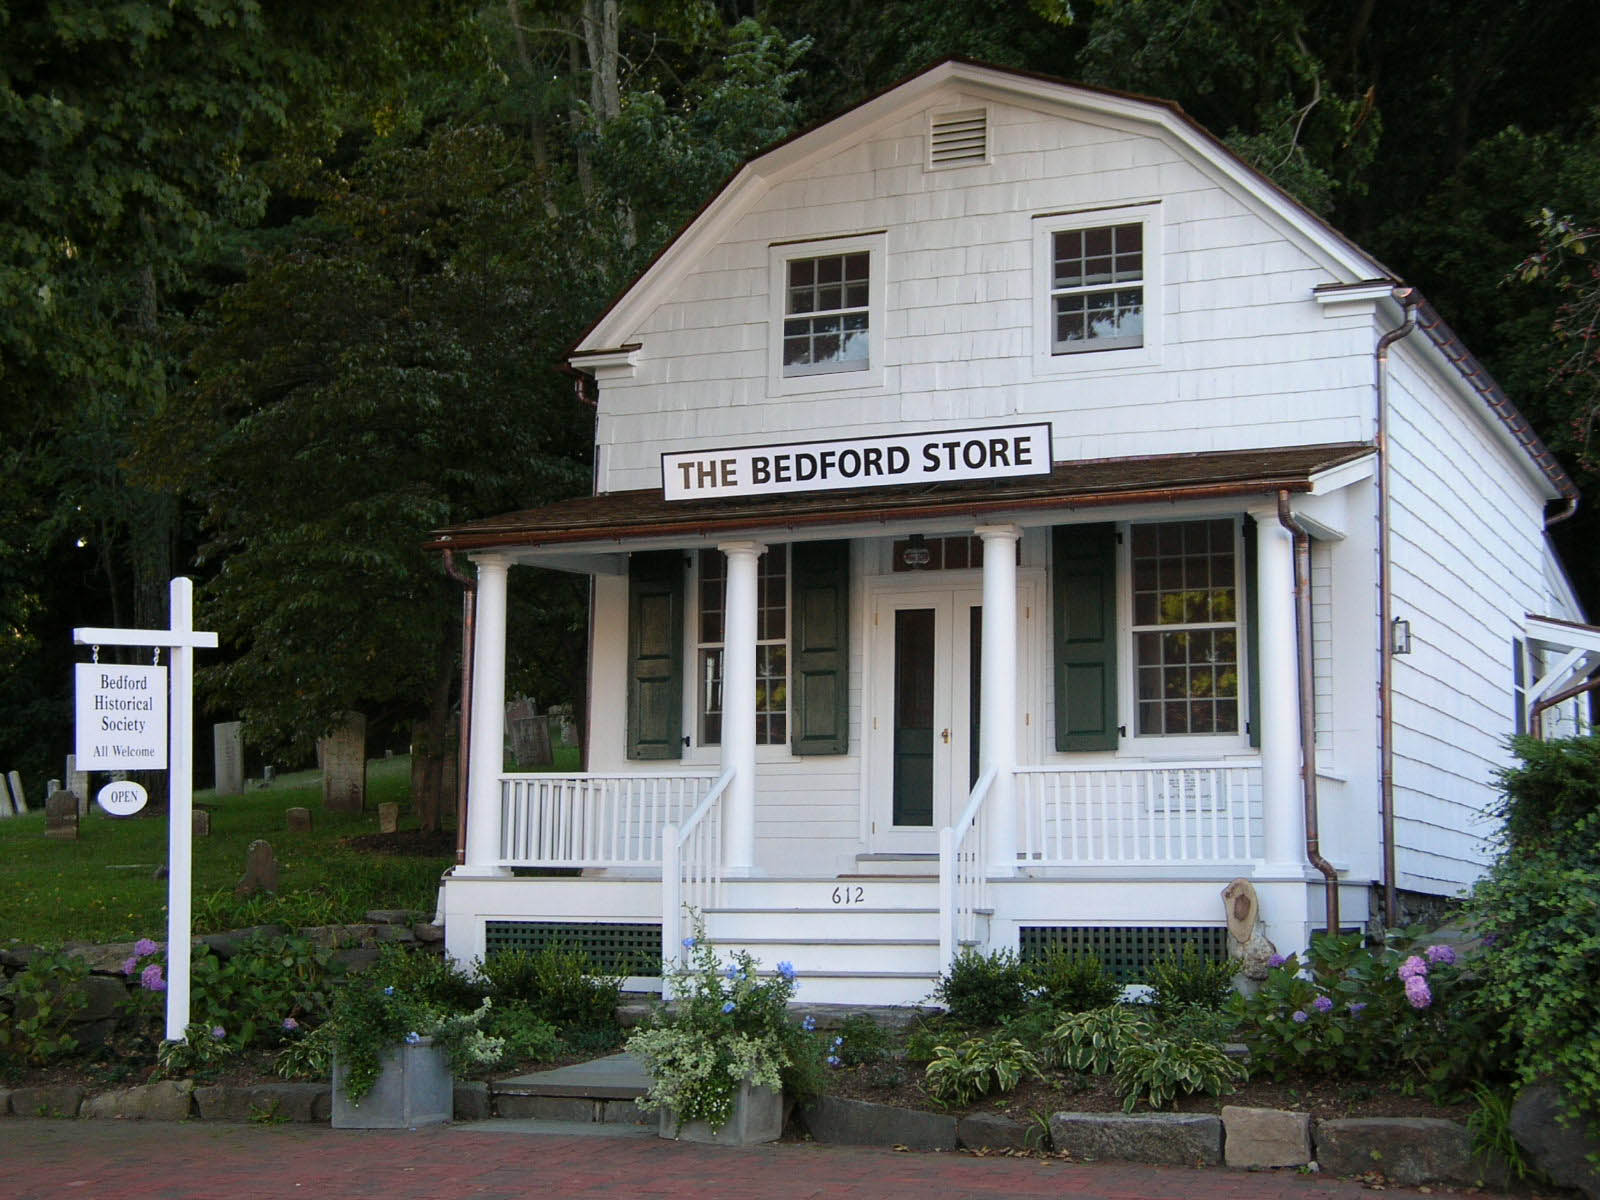 c. 1838 The Bedford Store